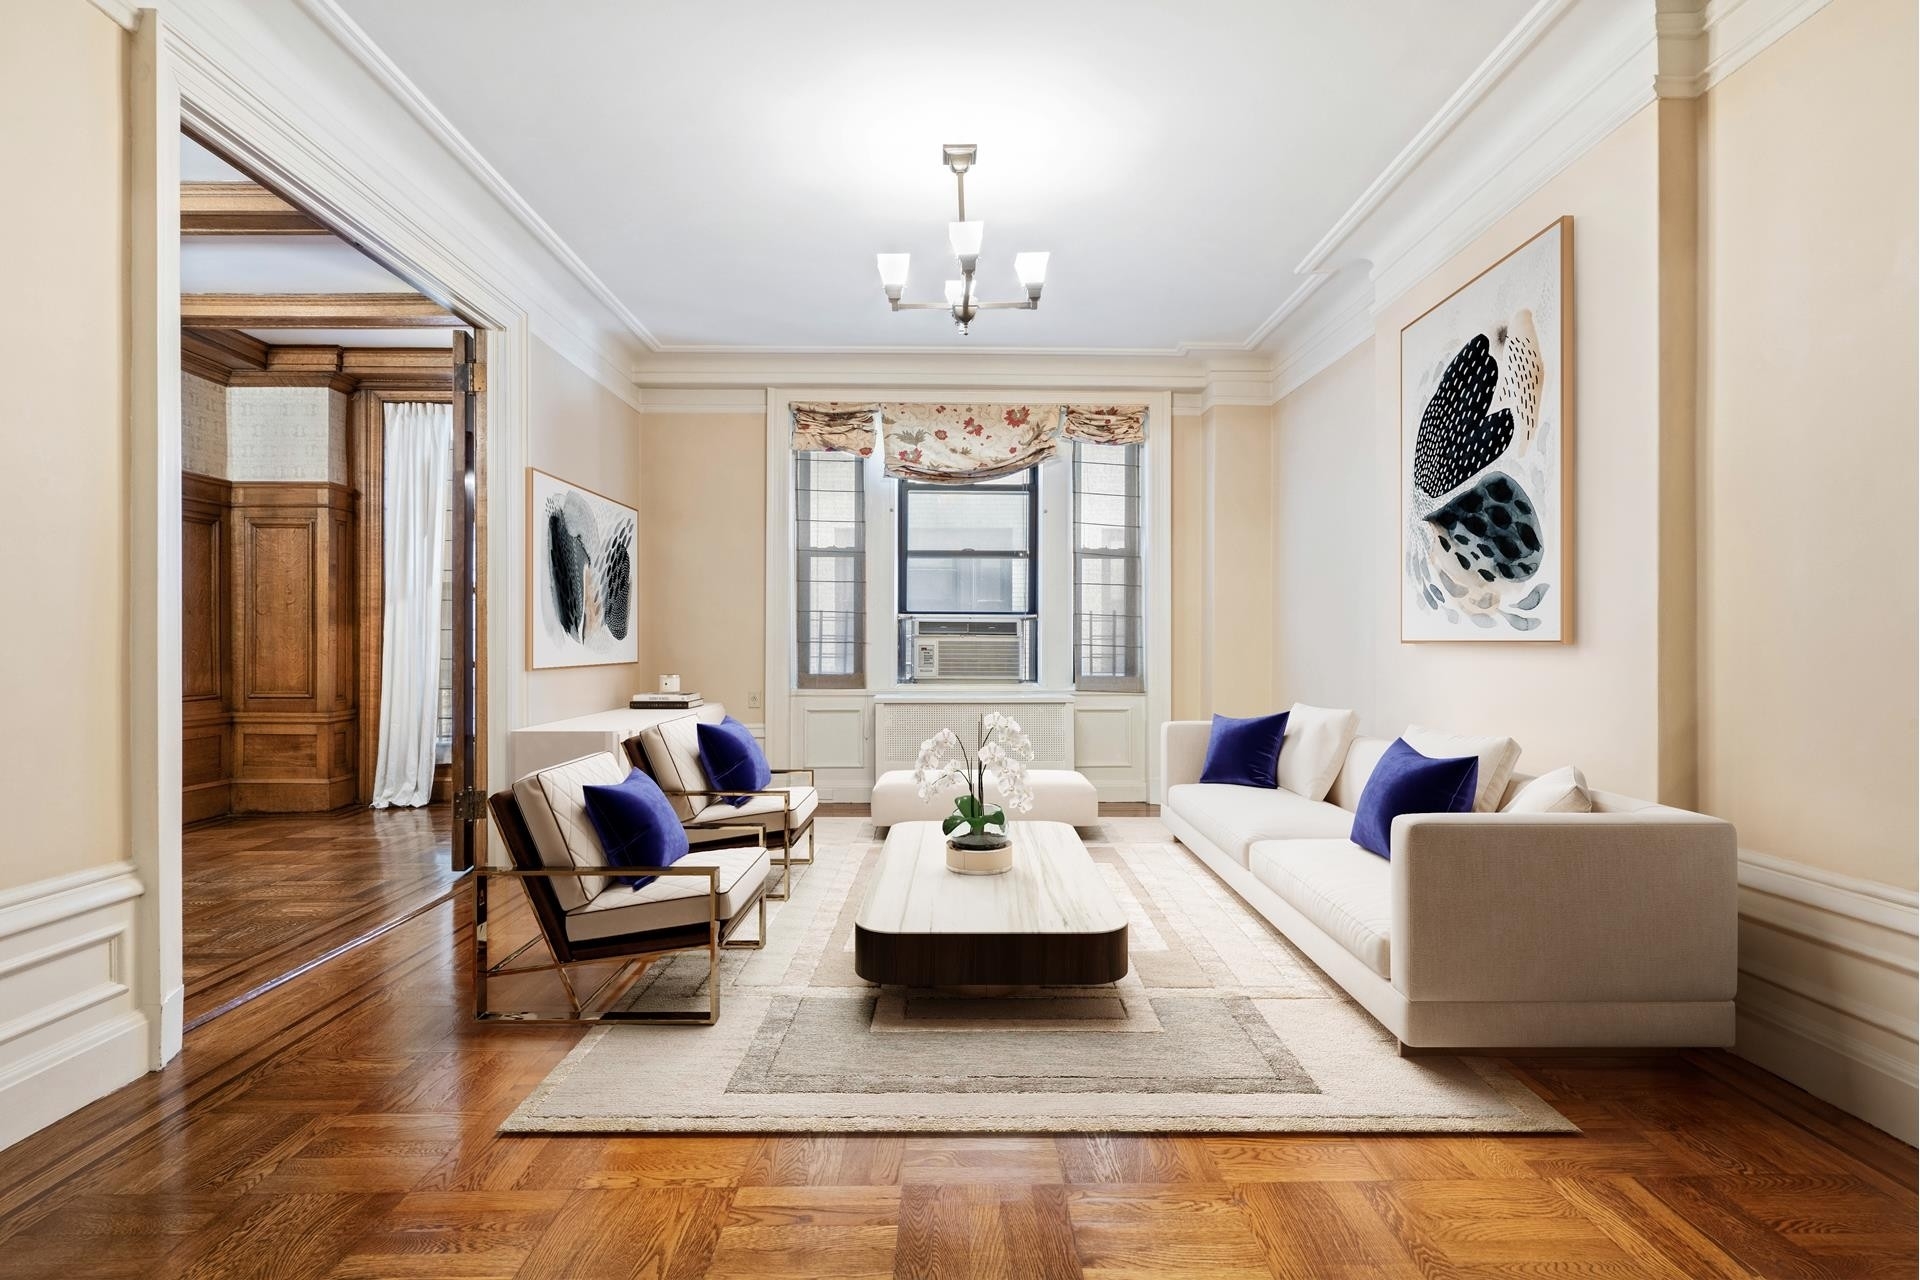 Co-op Properties for Sale at 645 W END AVE, 4C Upper West Side, New York, NY 10025